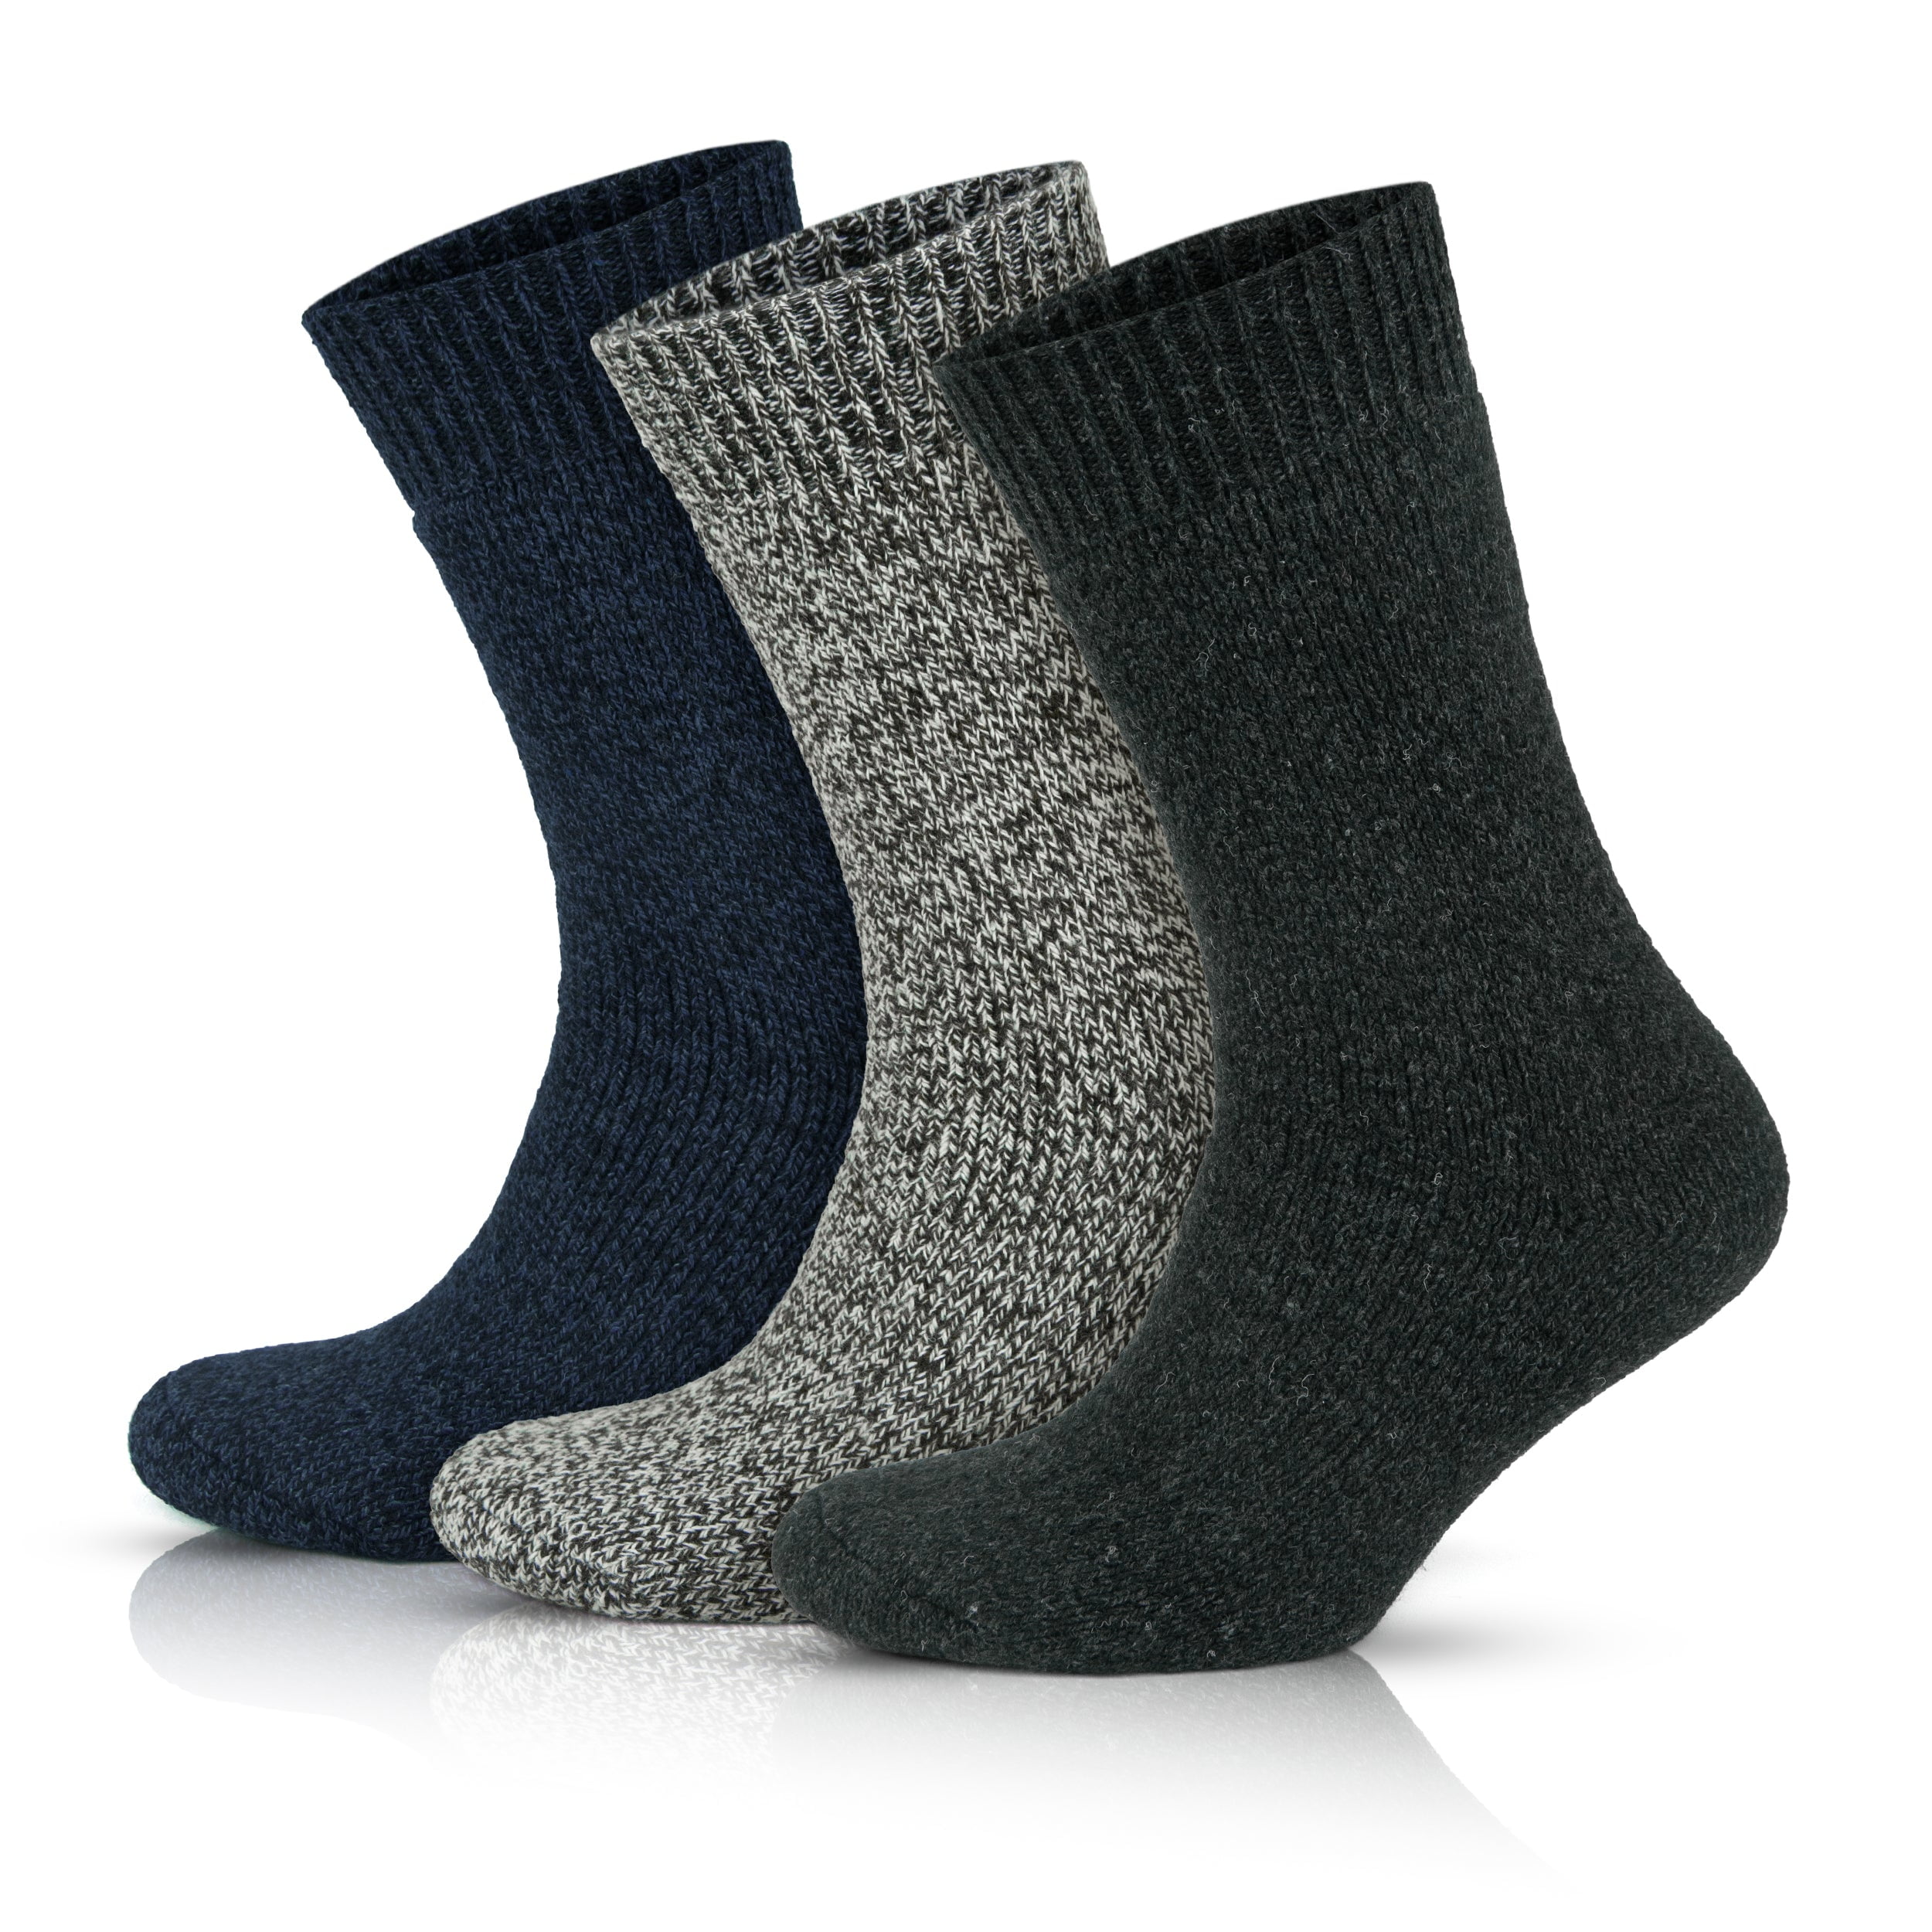 GoWith Men's Merino Wool Warm Cozy Thick Winter Socks | 3 Pairs | Model ...